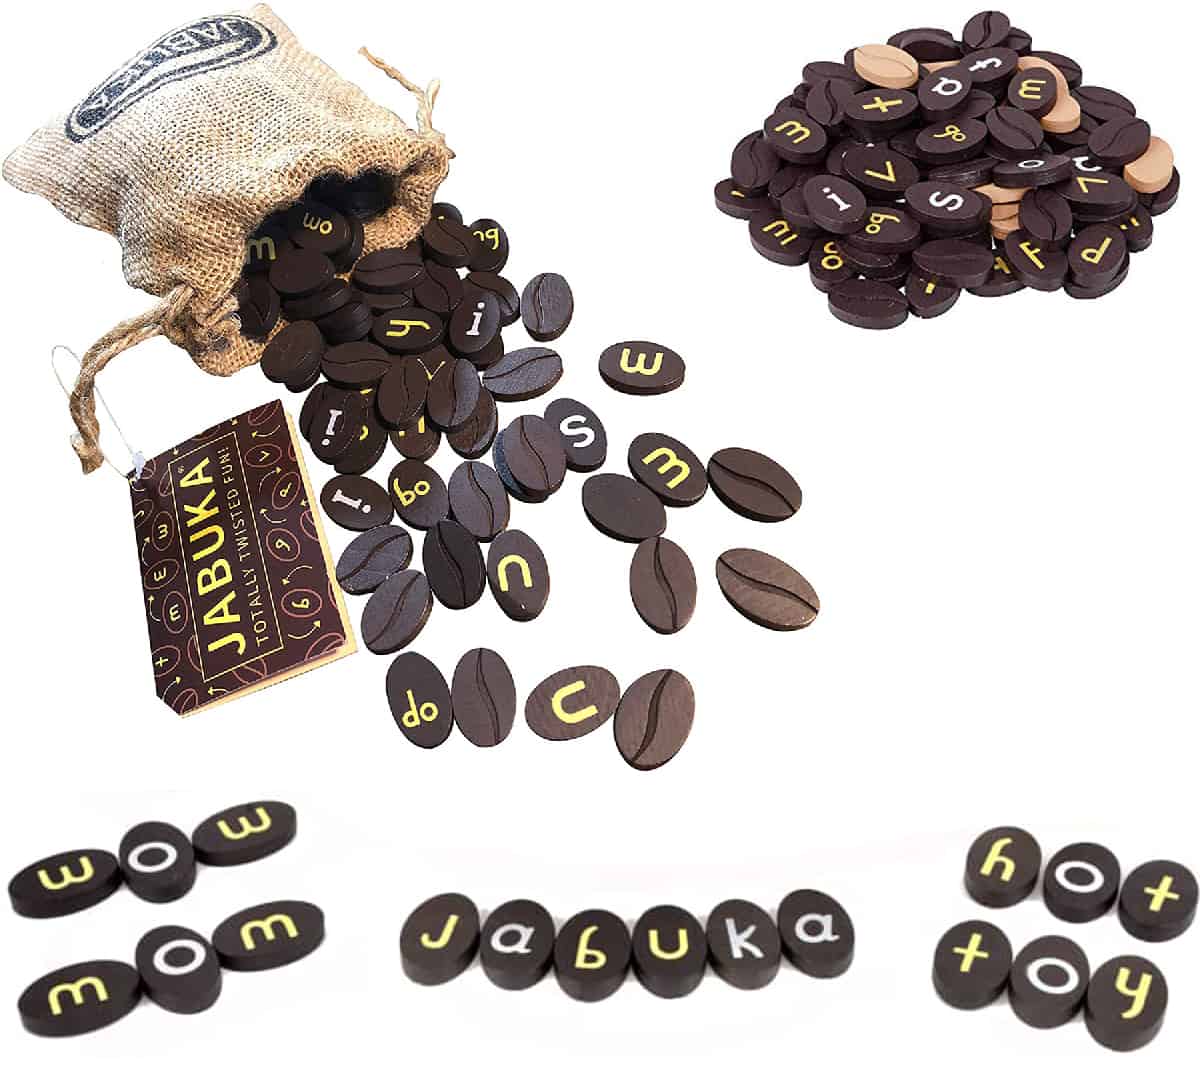 Jabuka (Jabuka) is a coffee-themed word tile game to learn spelling and  improve memory.